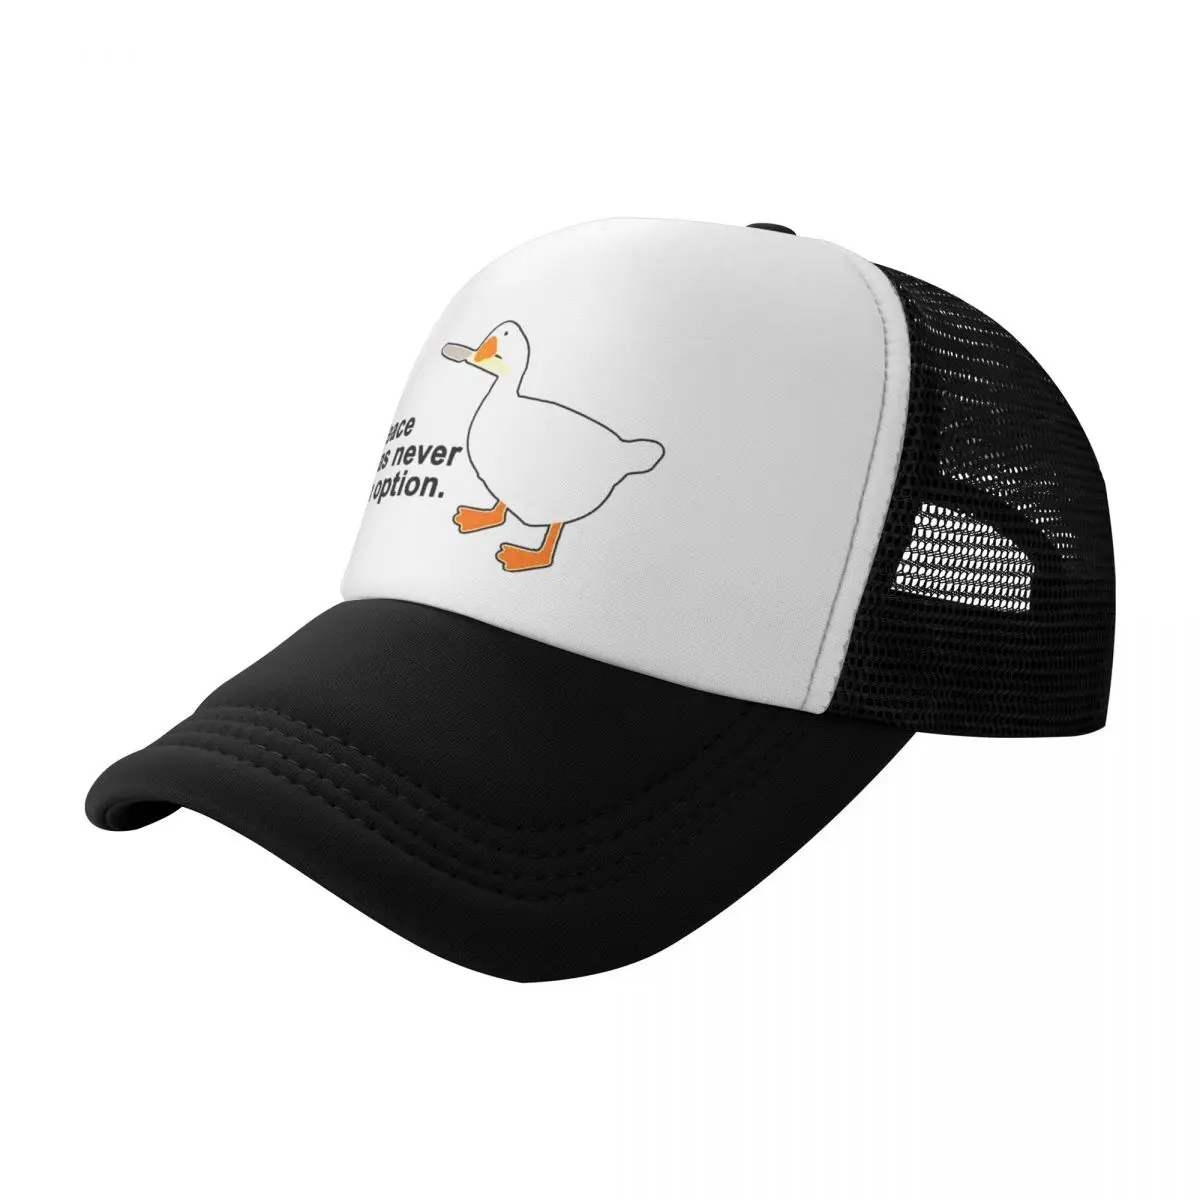 

Peace Was Never An Option - Funny Untitled Goose Game Men's and Women's hats Trucker Hats Golf hip hop Graphic hat